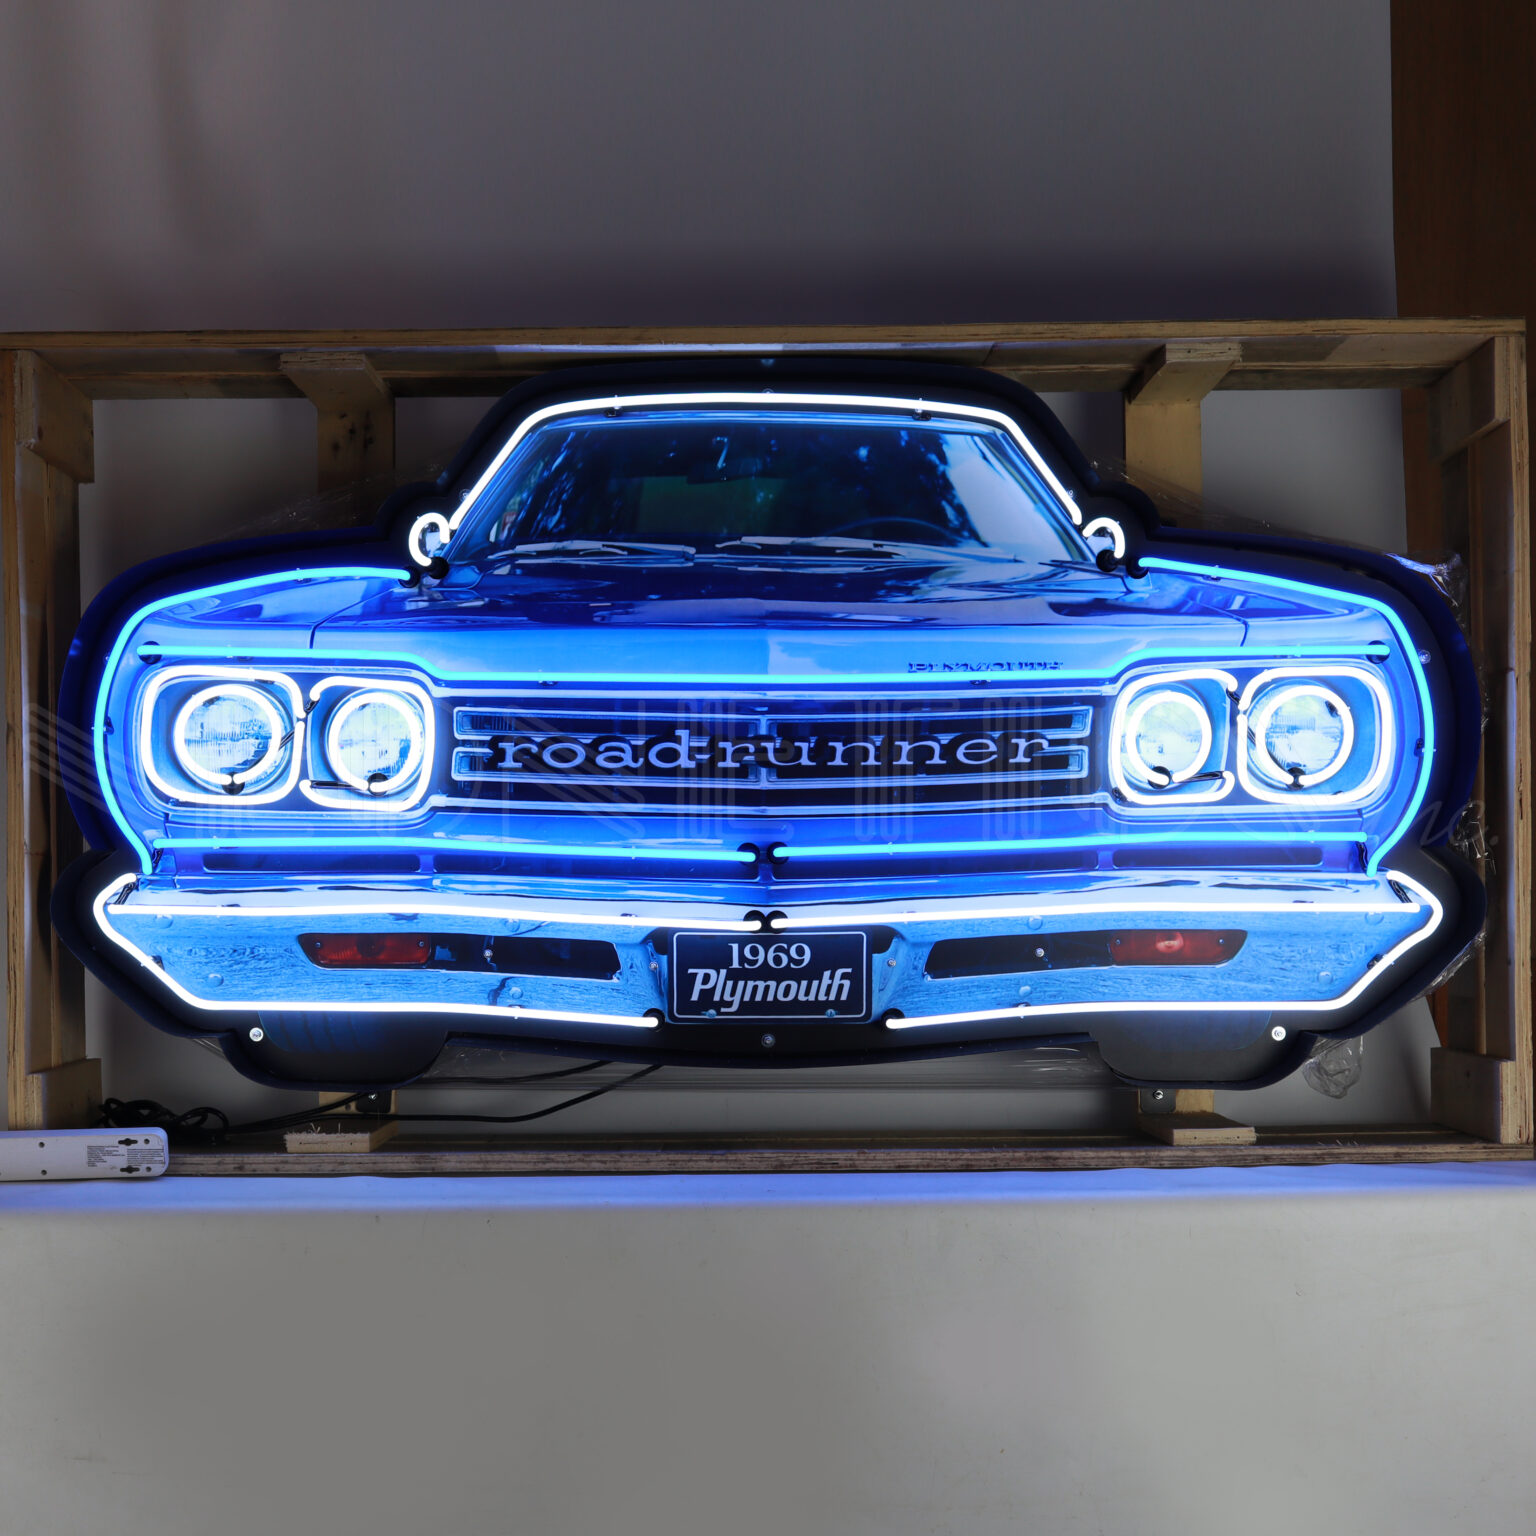 Plymouth Roadrunner grill neon sign - Auto